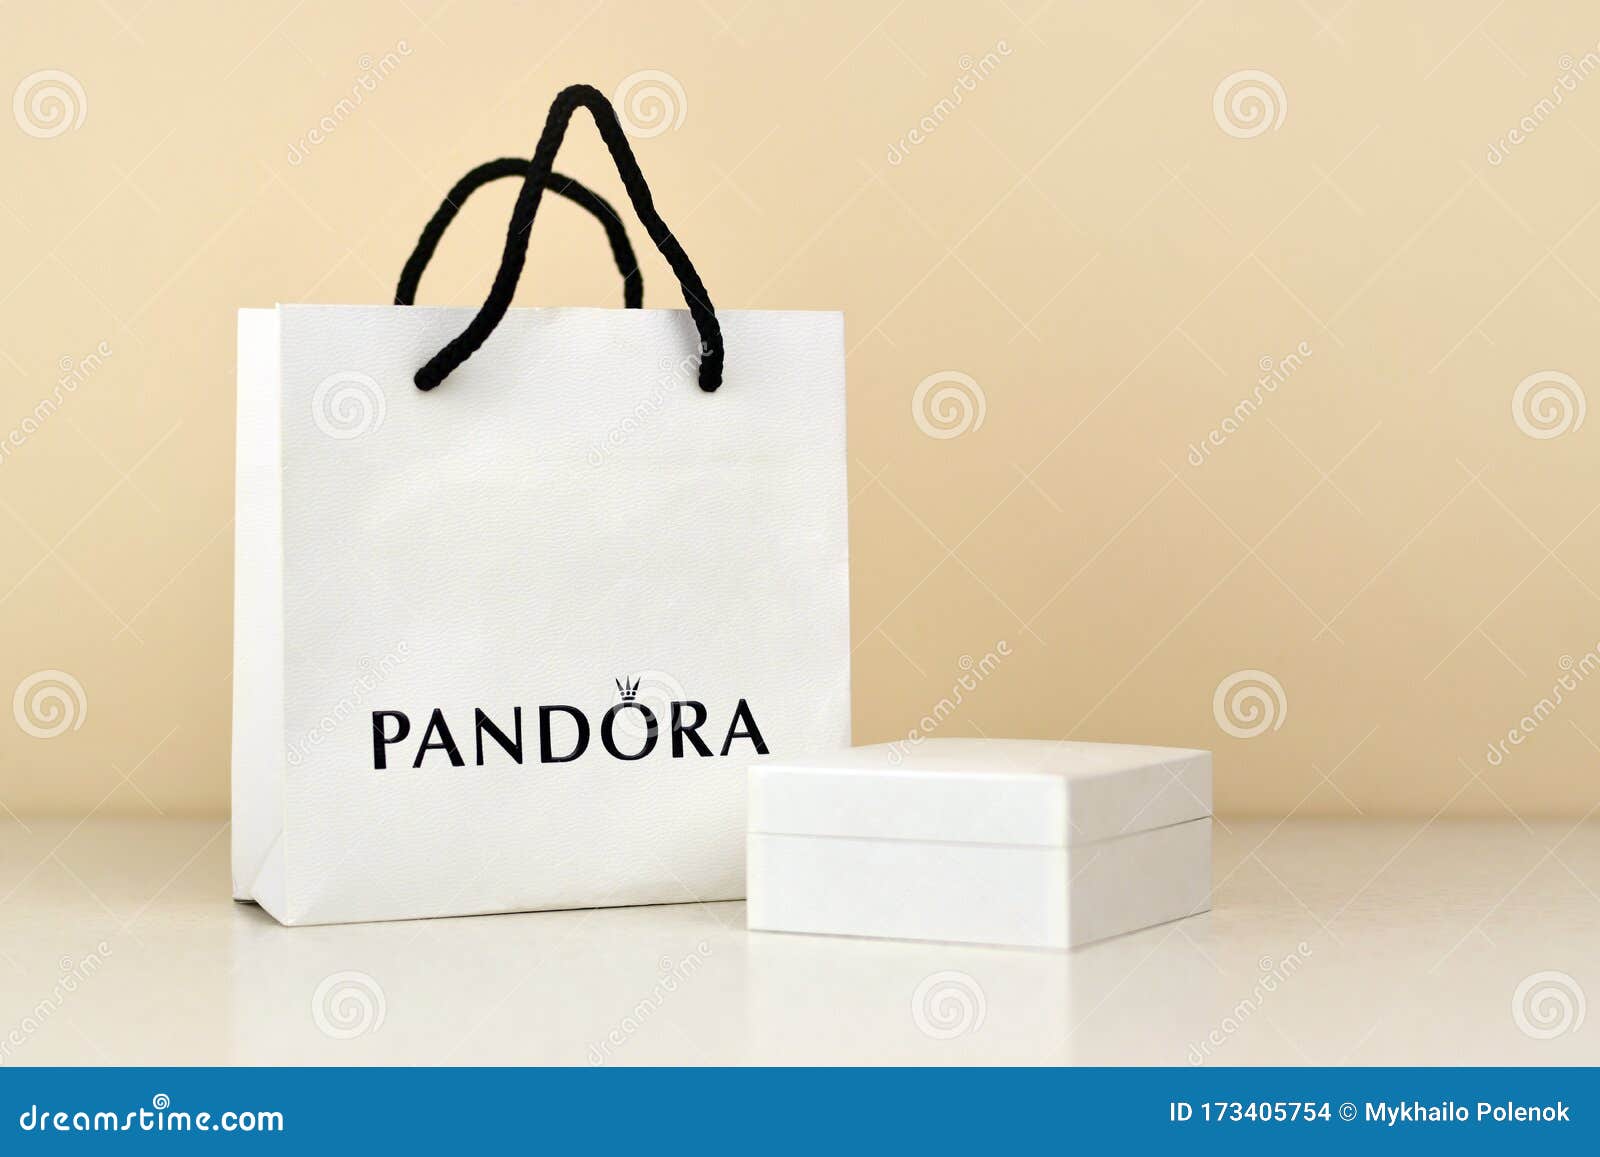 Pandora Carrier Bag with Logo. Pandora Brand is a Manufacturer of Jewelry Products Copenhagen, Denmark Editorial Stock Image Image of famous, pack: 173405754